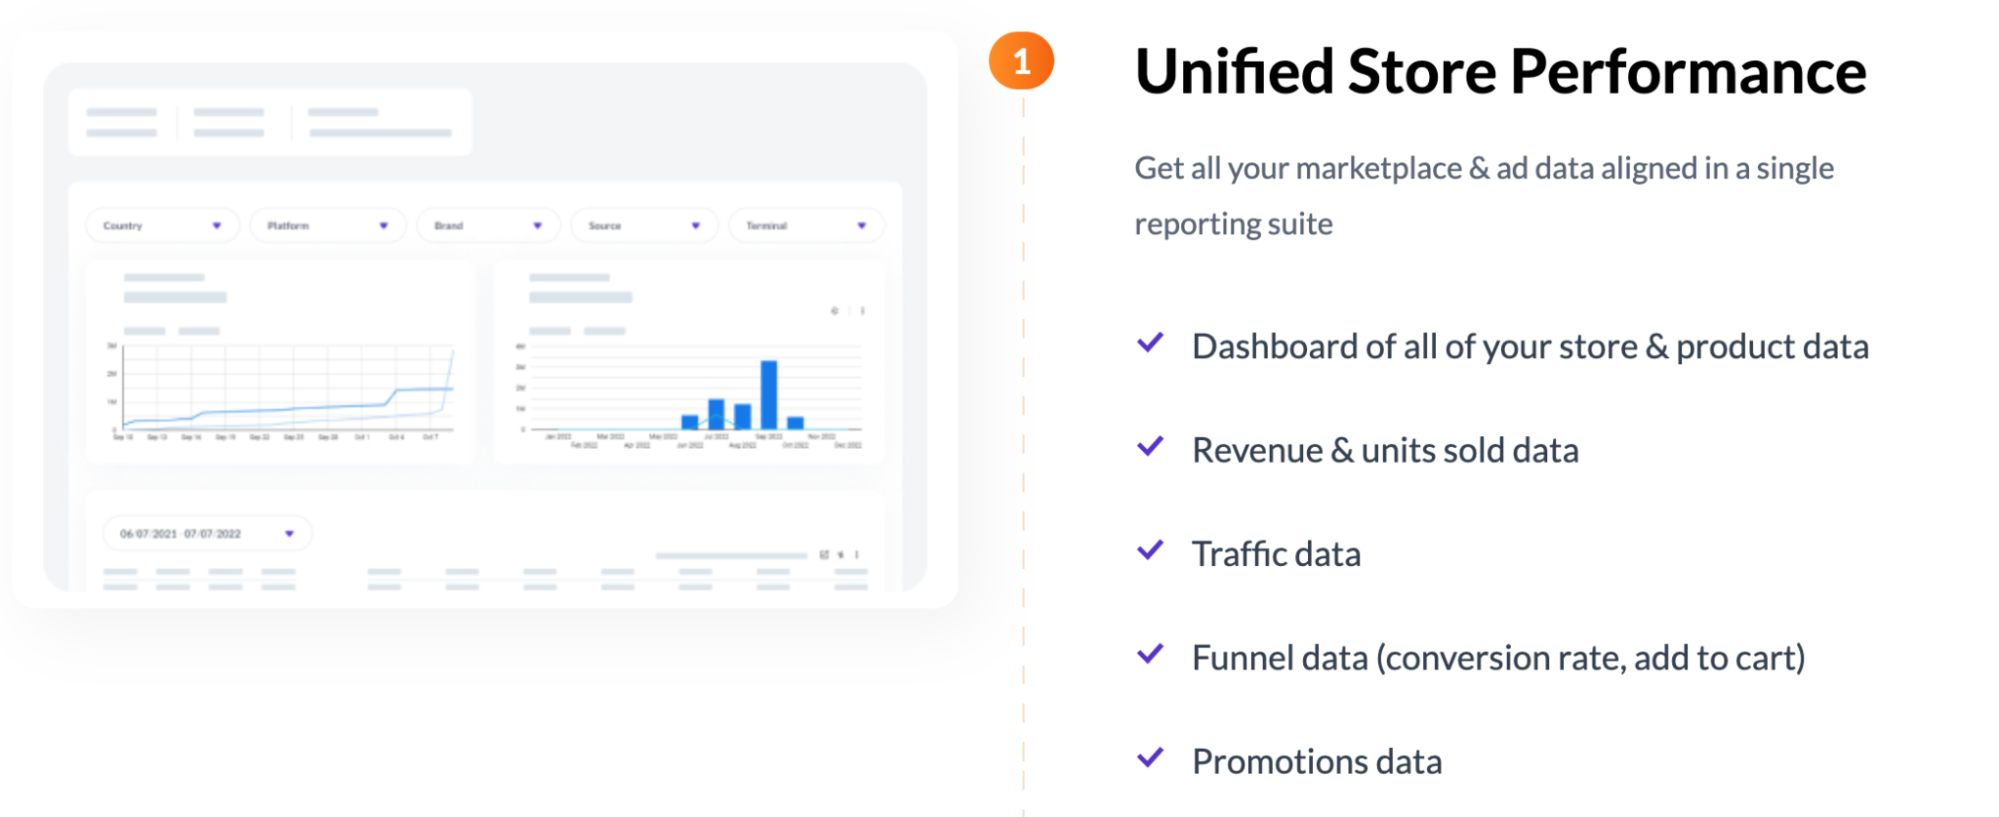 The Ultimate Guide to Retail and Ecommerce Dashboards